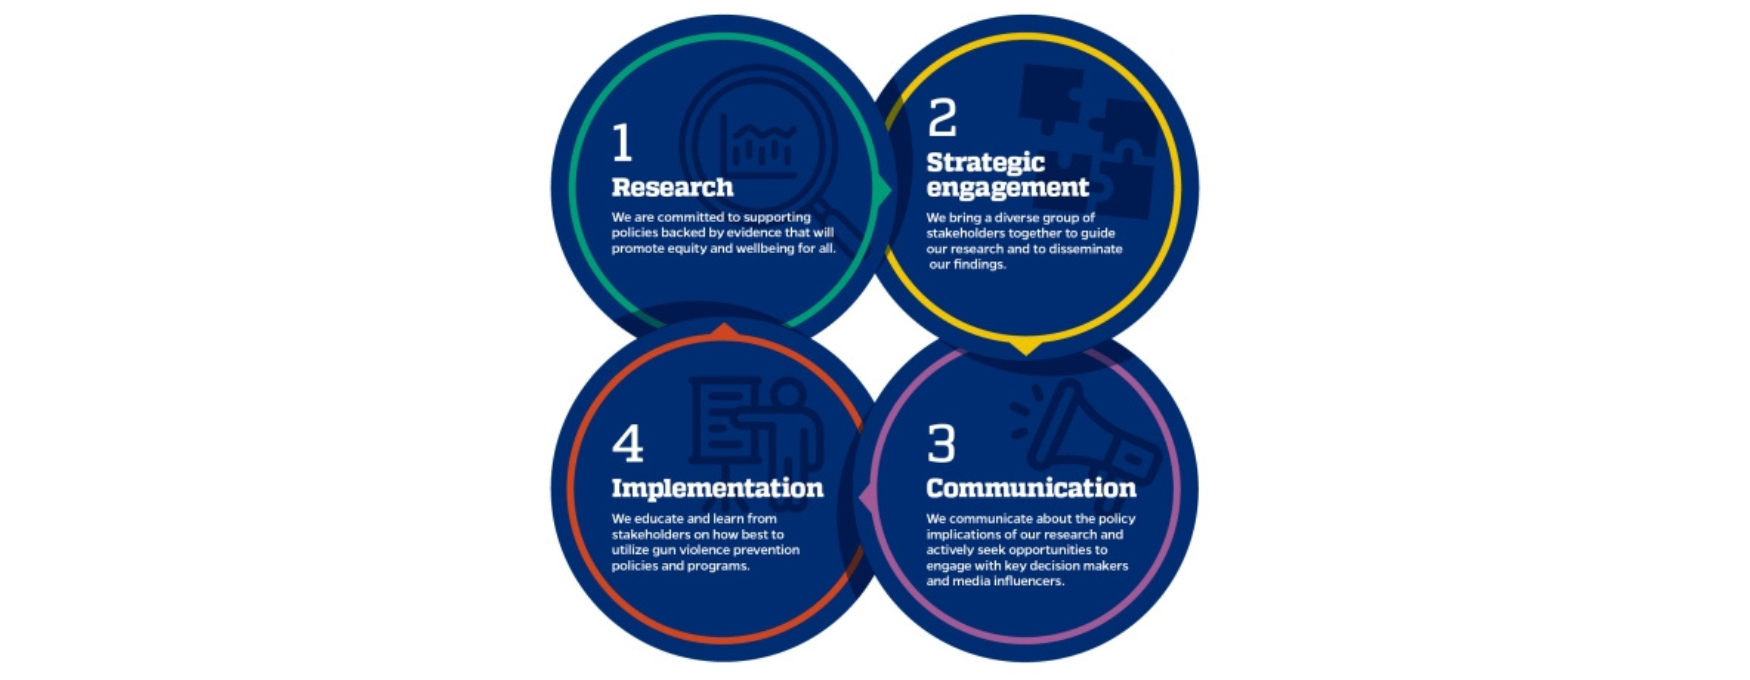 Four prong approach: Research, Strategic Engagement, Communication, Implementation